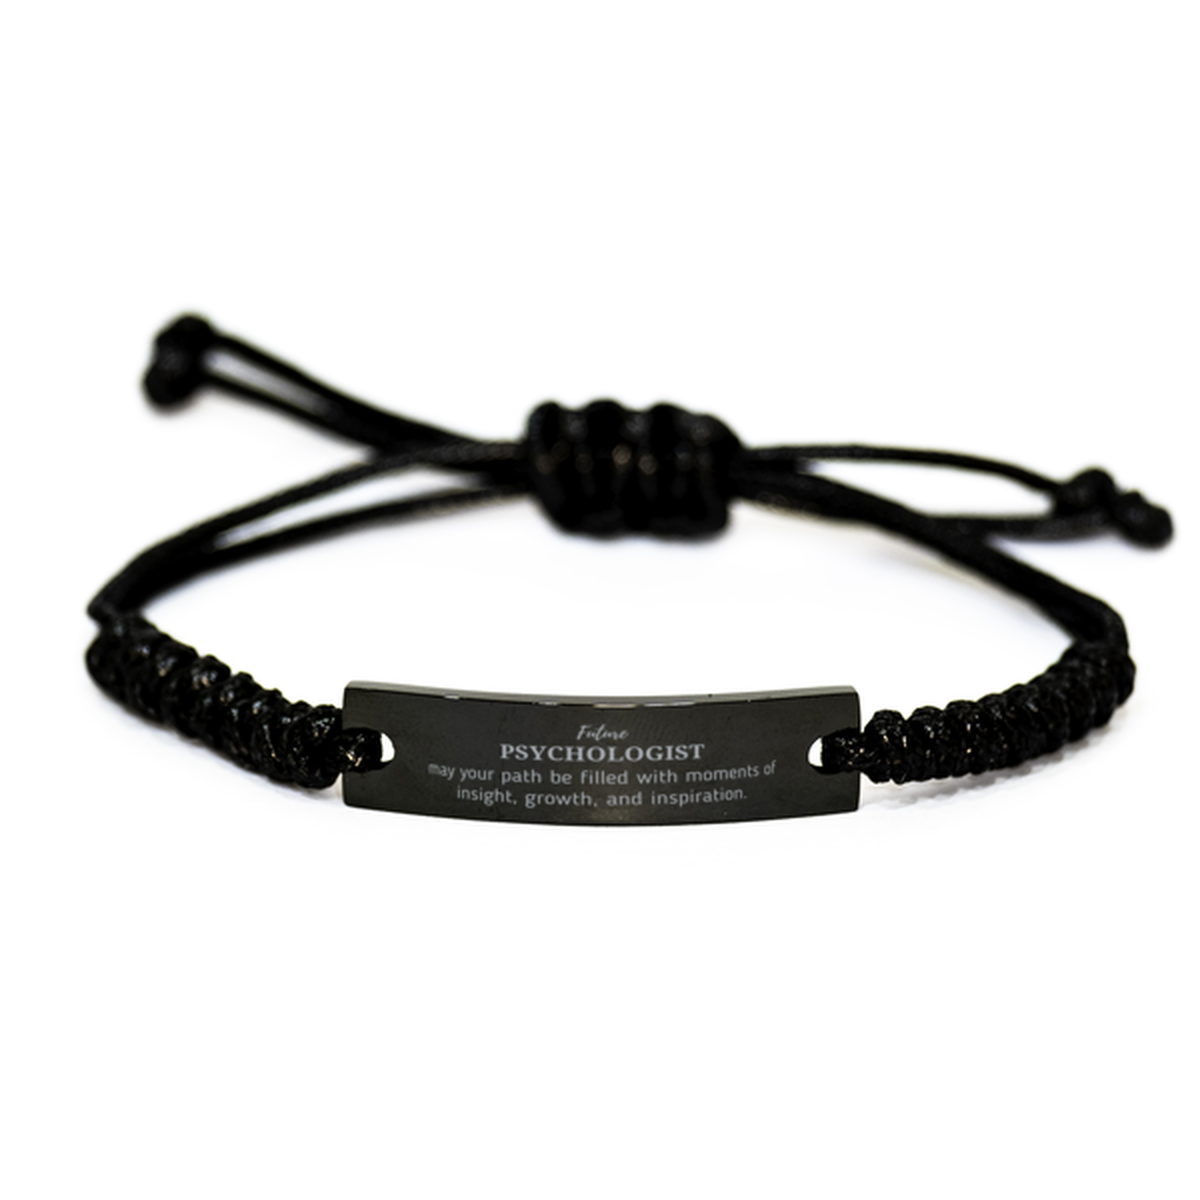 Future Psychologist Gifts, May your path be filled with moments of insight, Graduation Gifts for New Psychologist, Christmas Unique Black Rope Bracelet For Men, Women, Friends